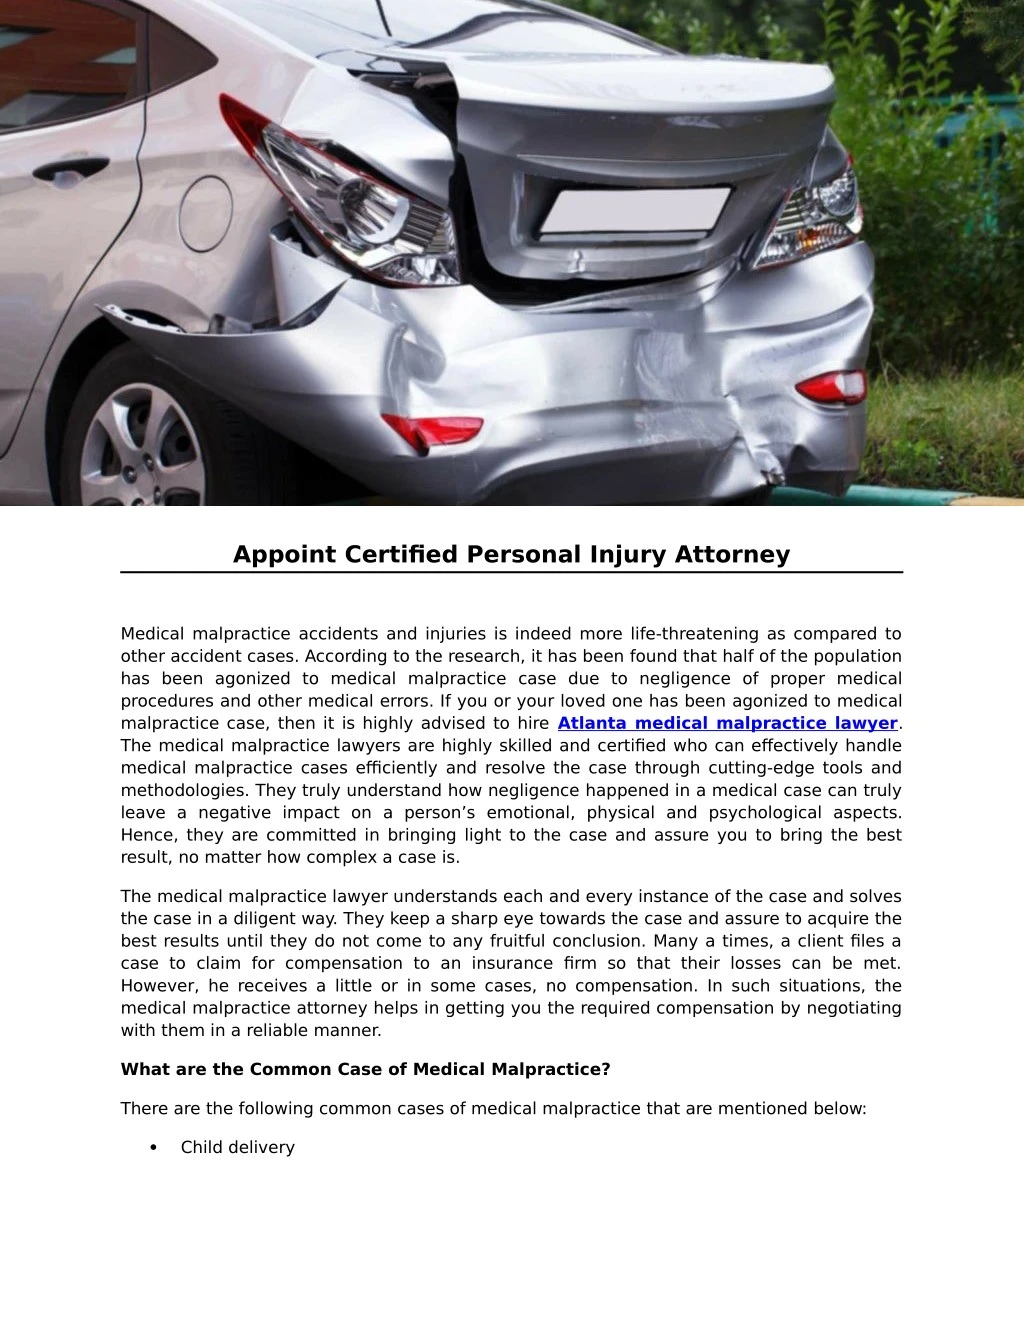 appoint certified personal injury attorney